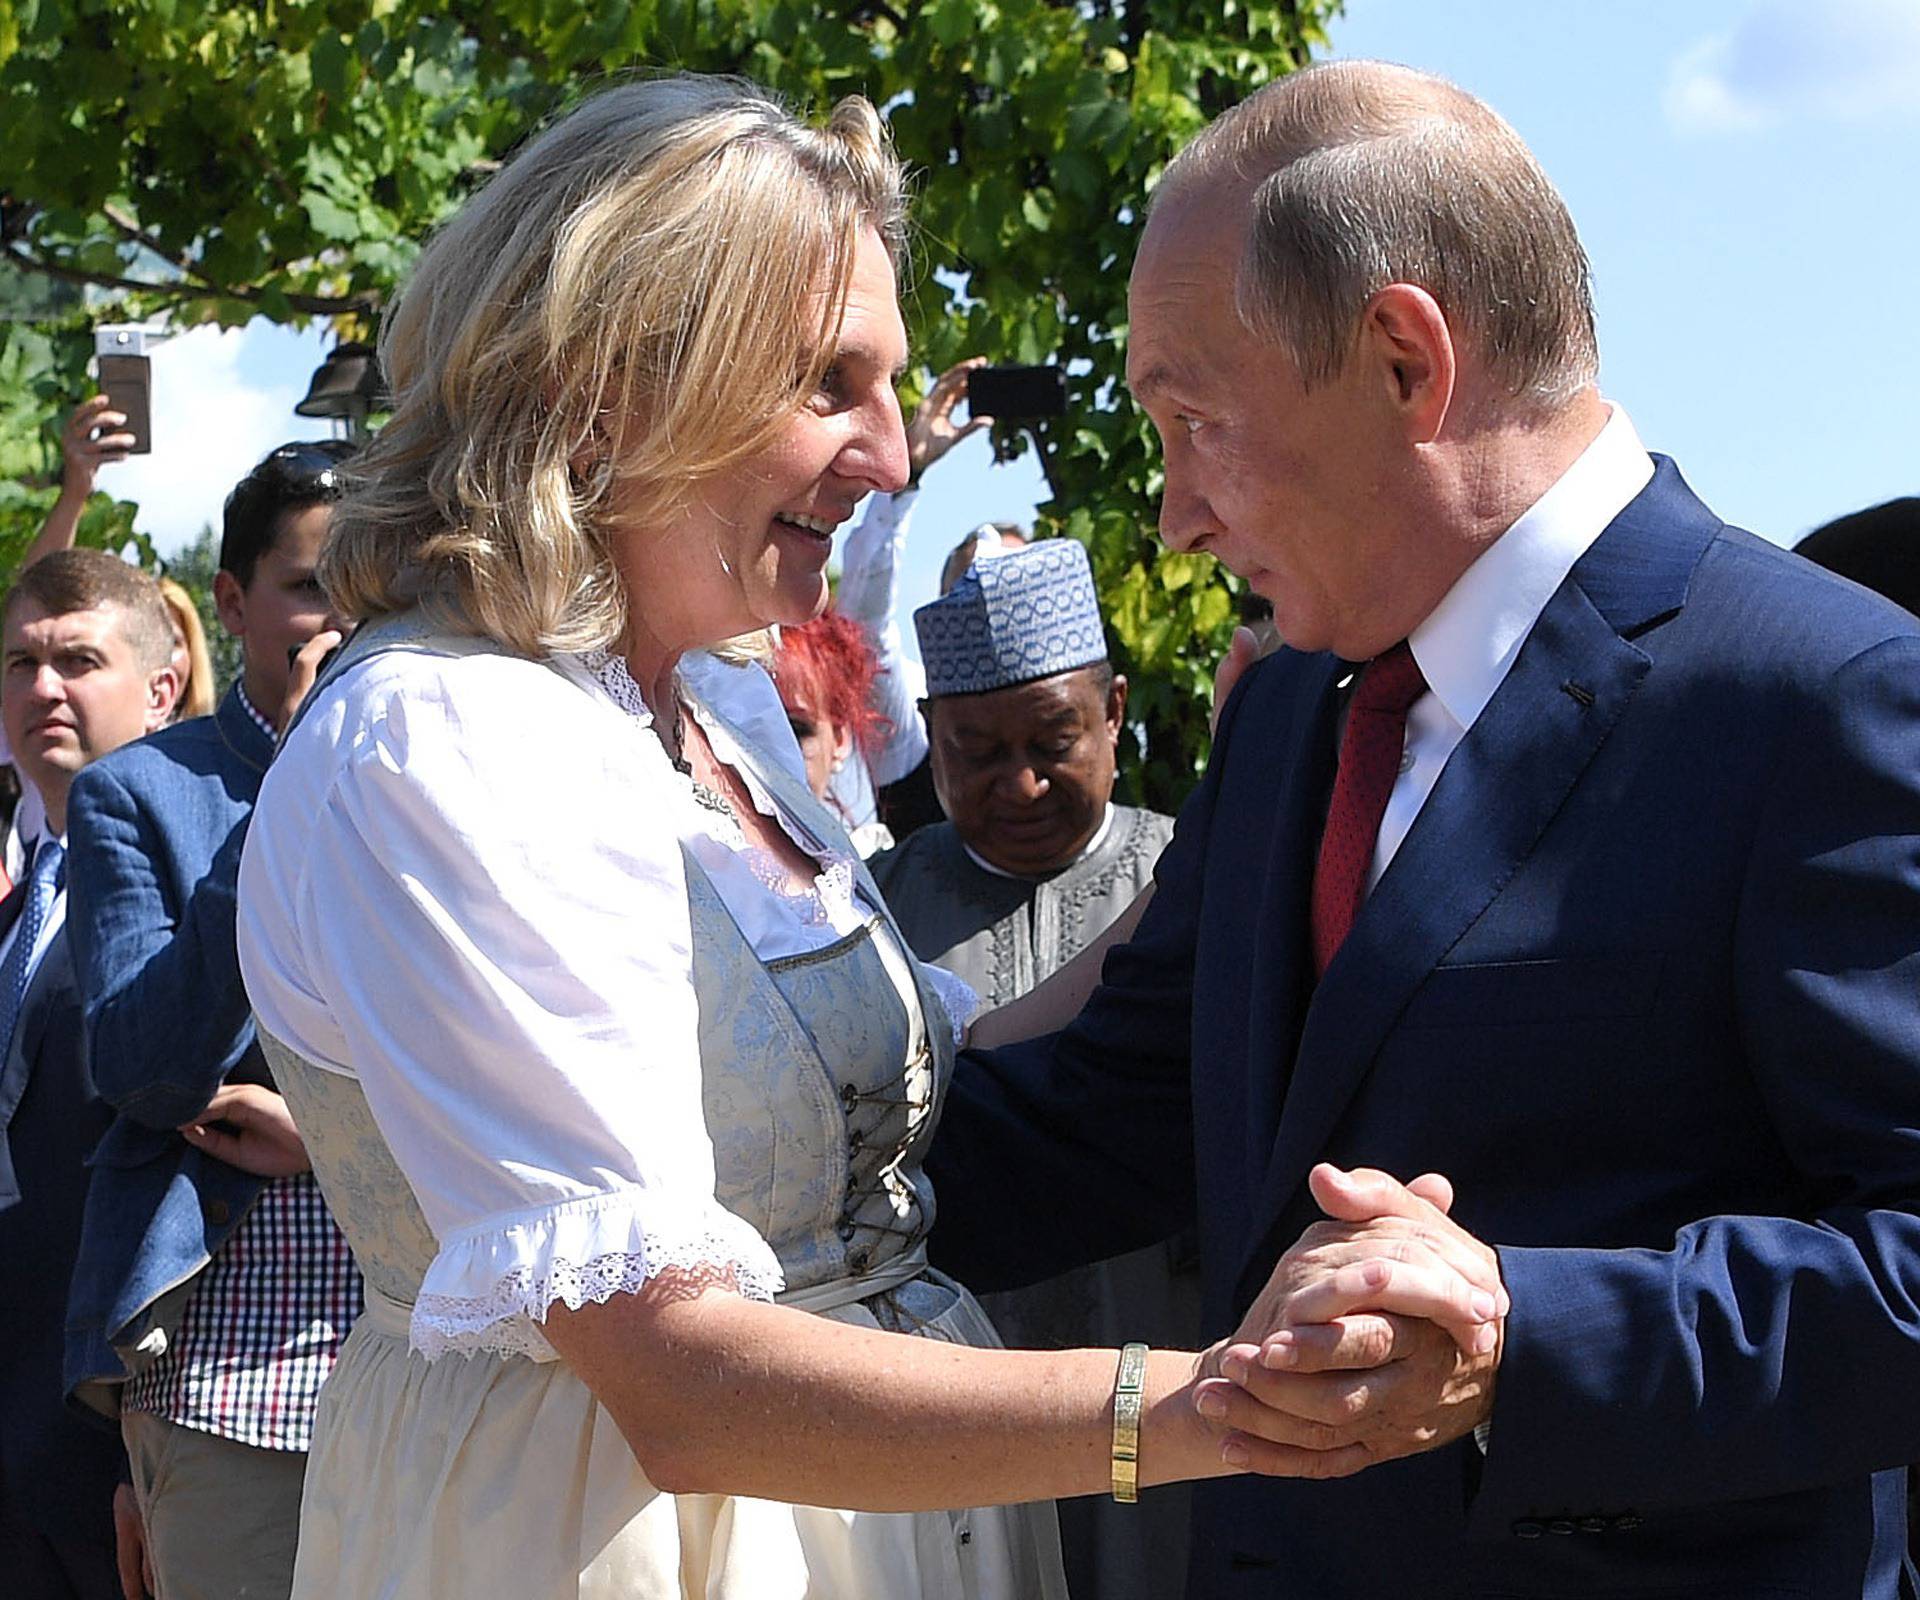 Austria's Foreign Minister Kneissl dances with Russia's President Putin at her wedding in Gamlitz